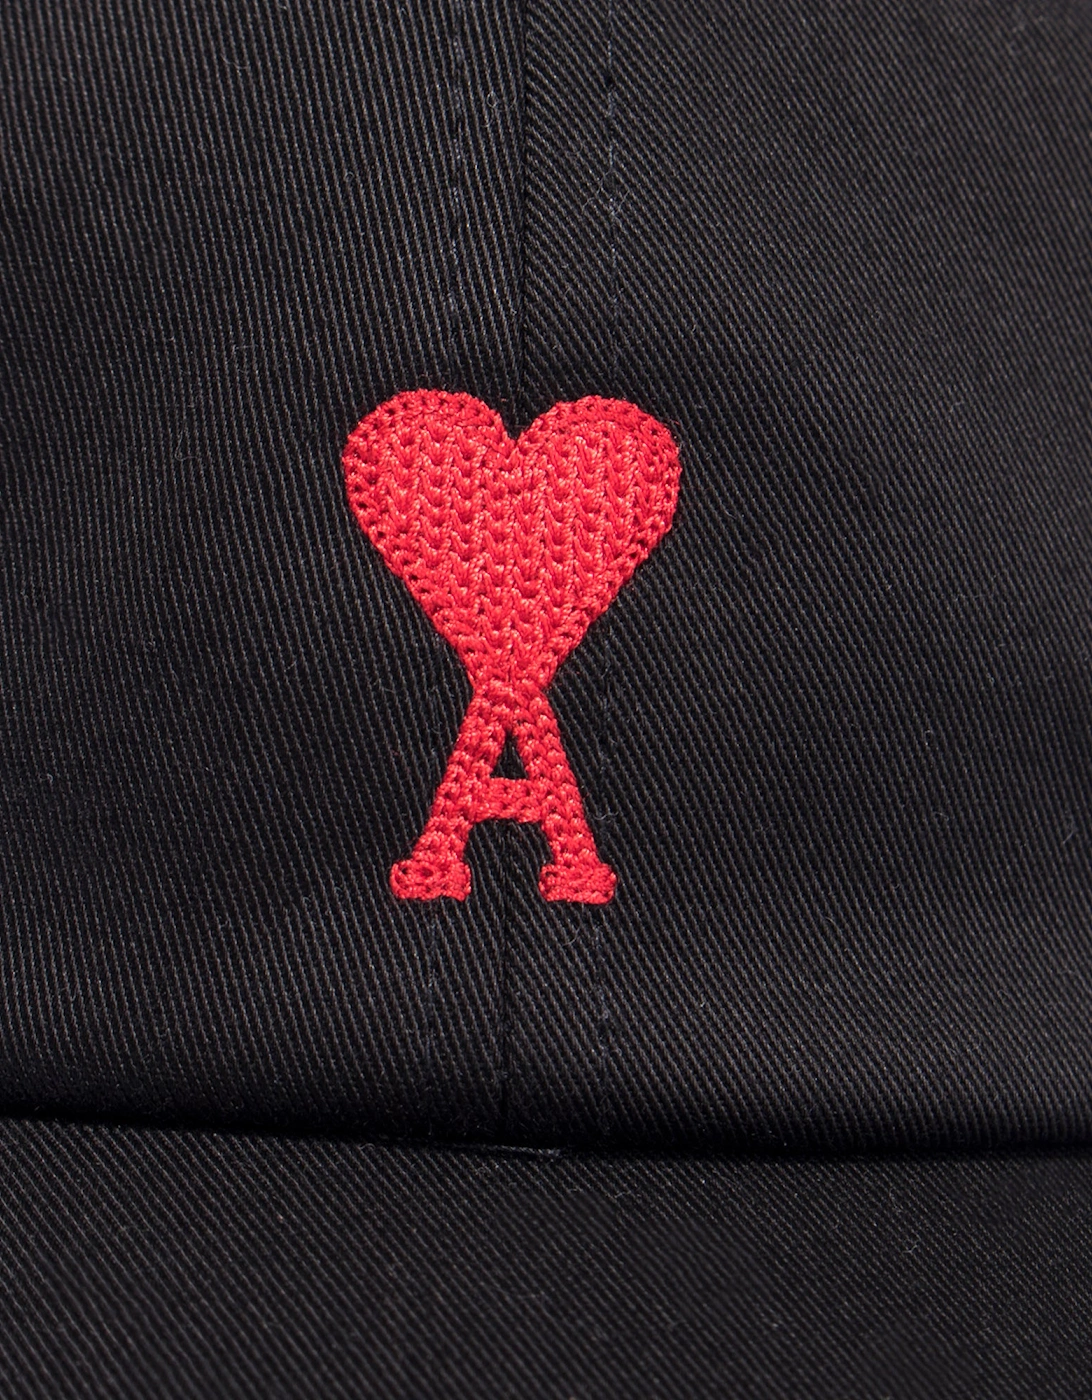 Red ADC Embroidery Cap